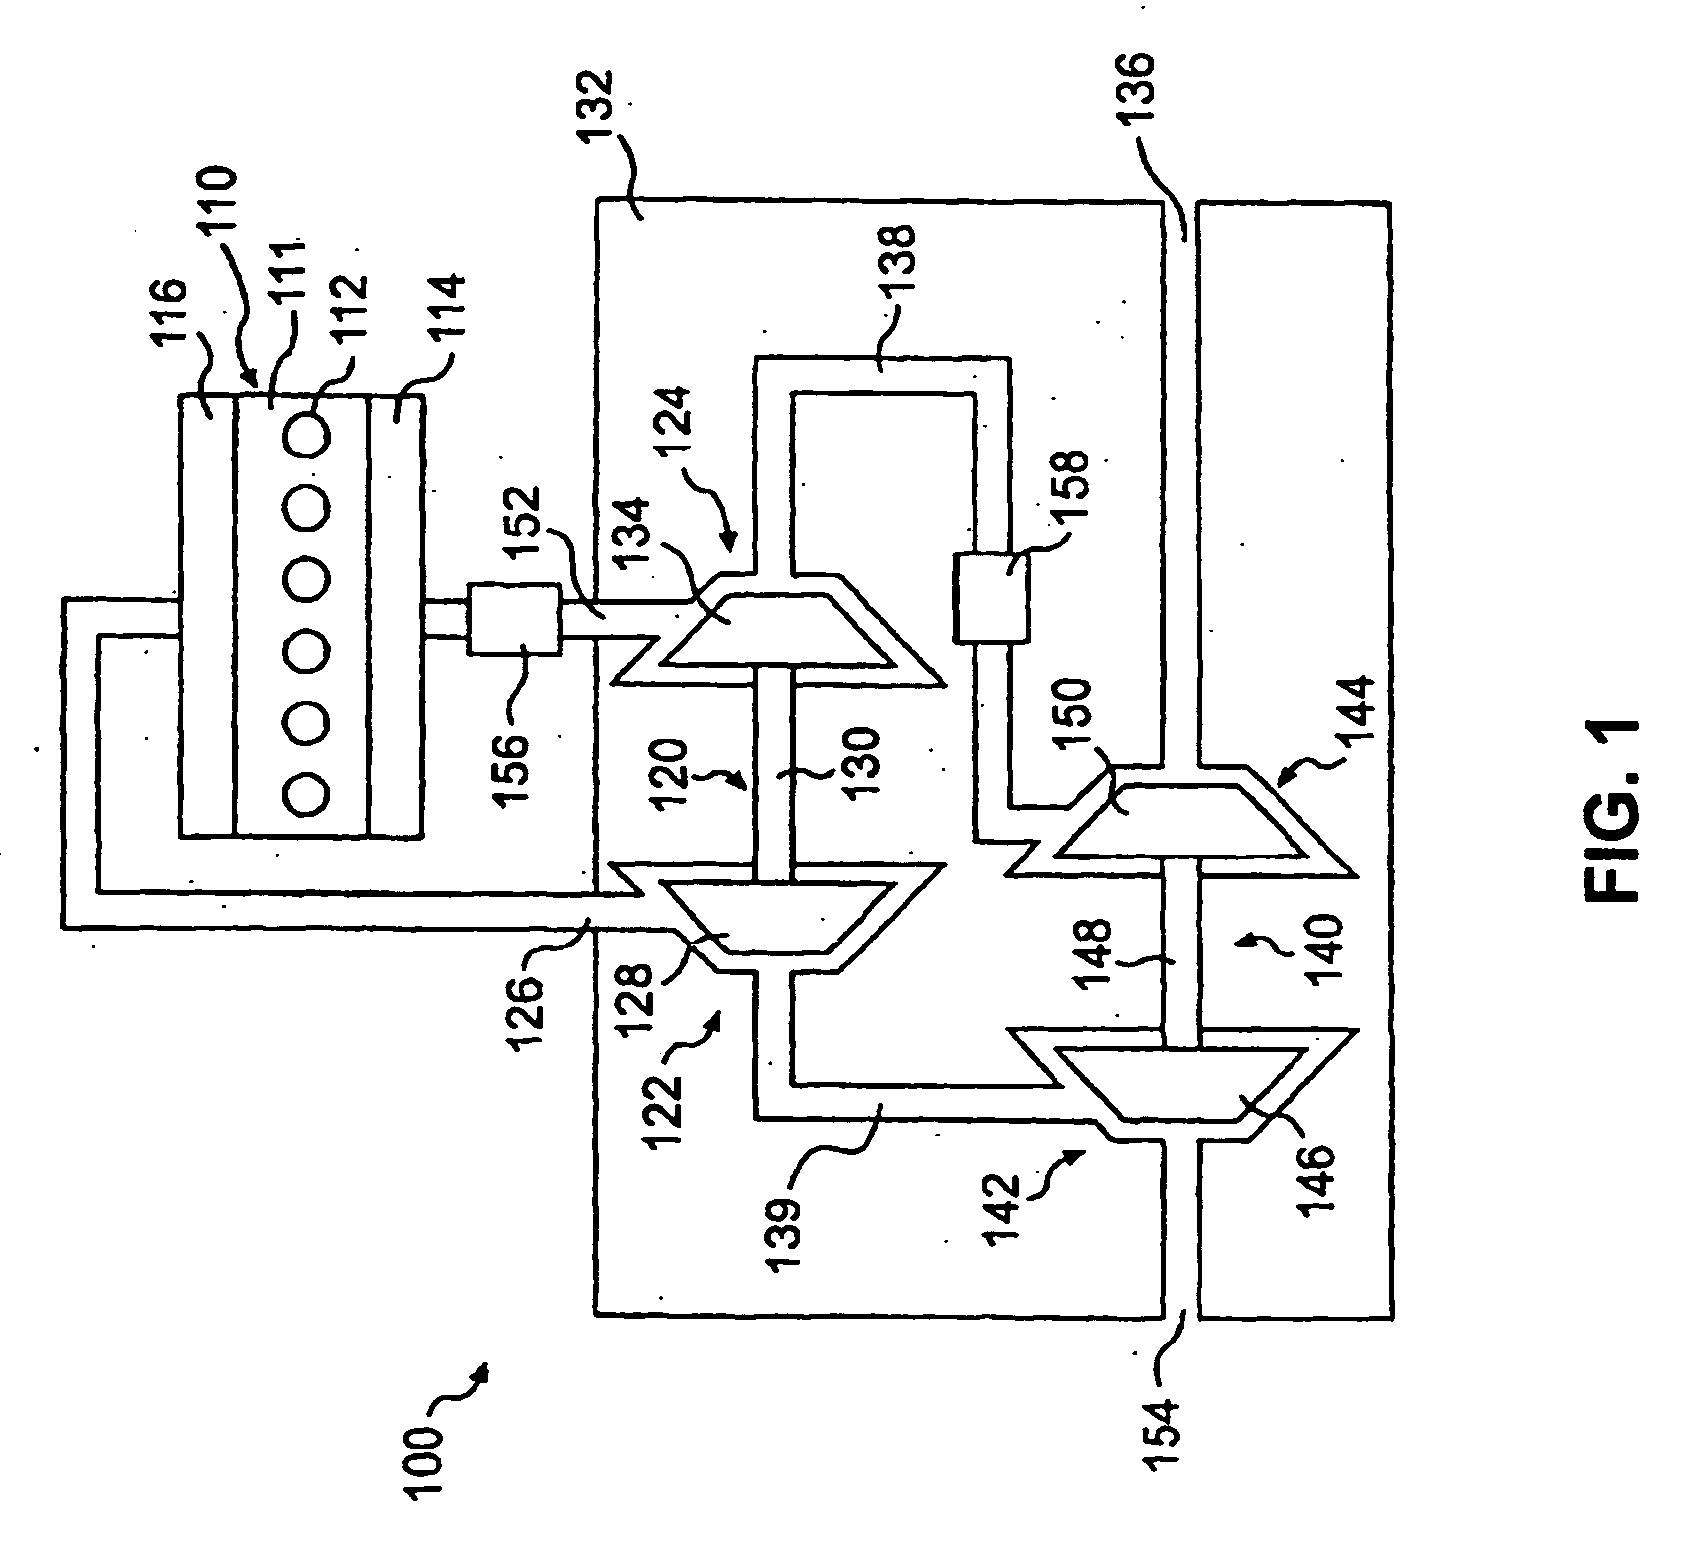 Combustion engine including engine valve actuation system